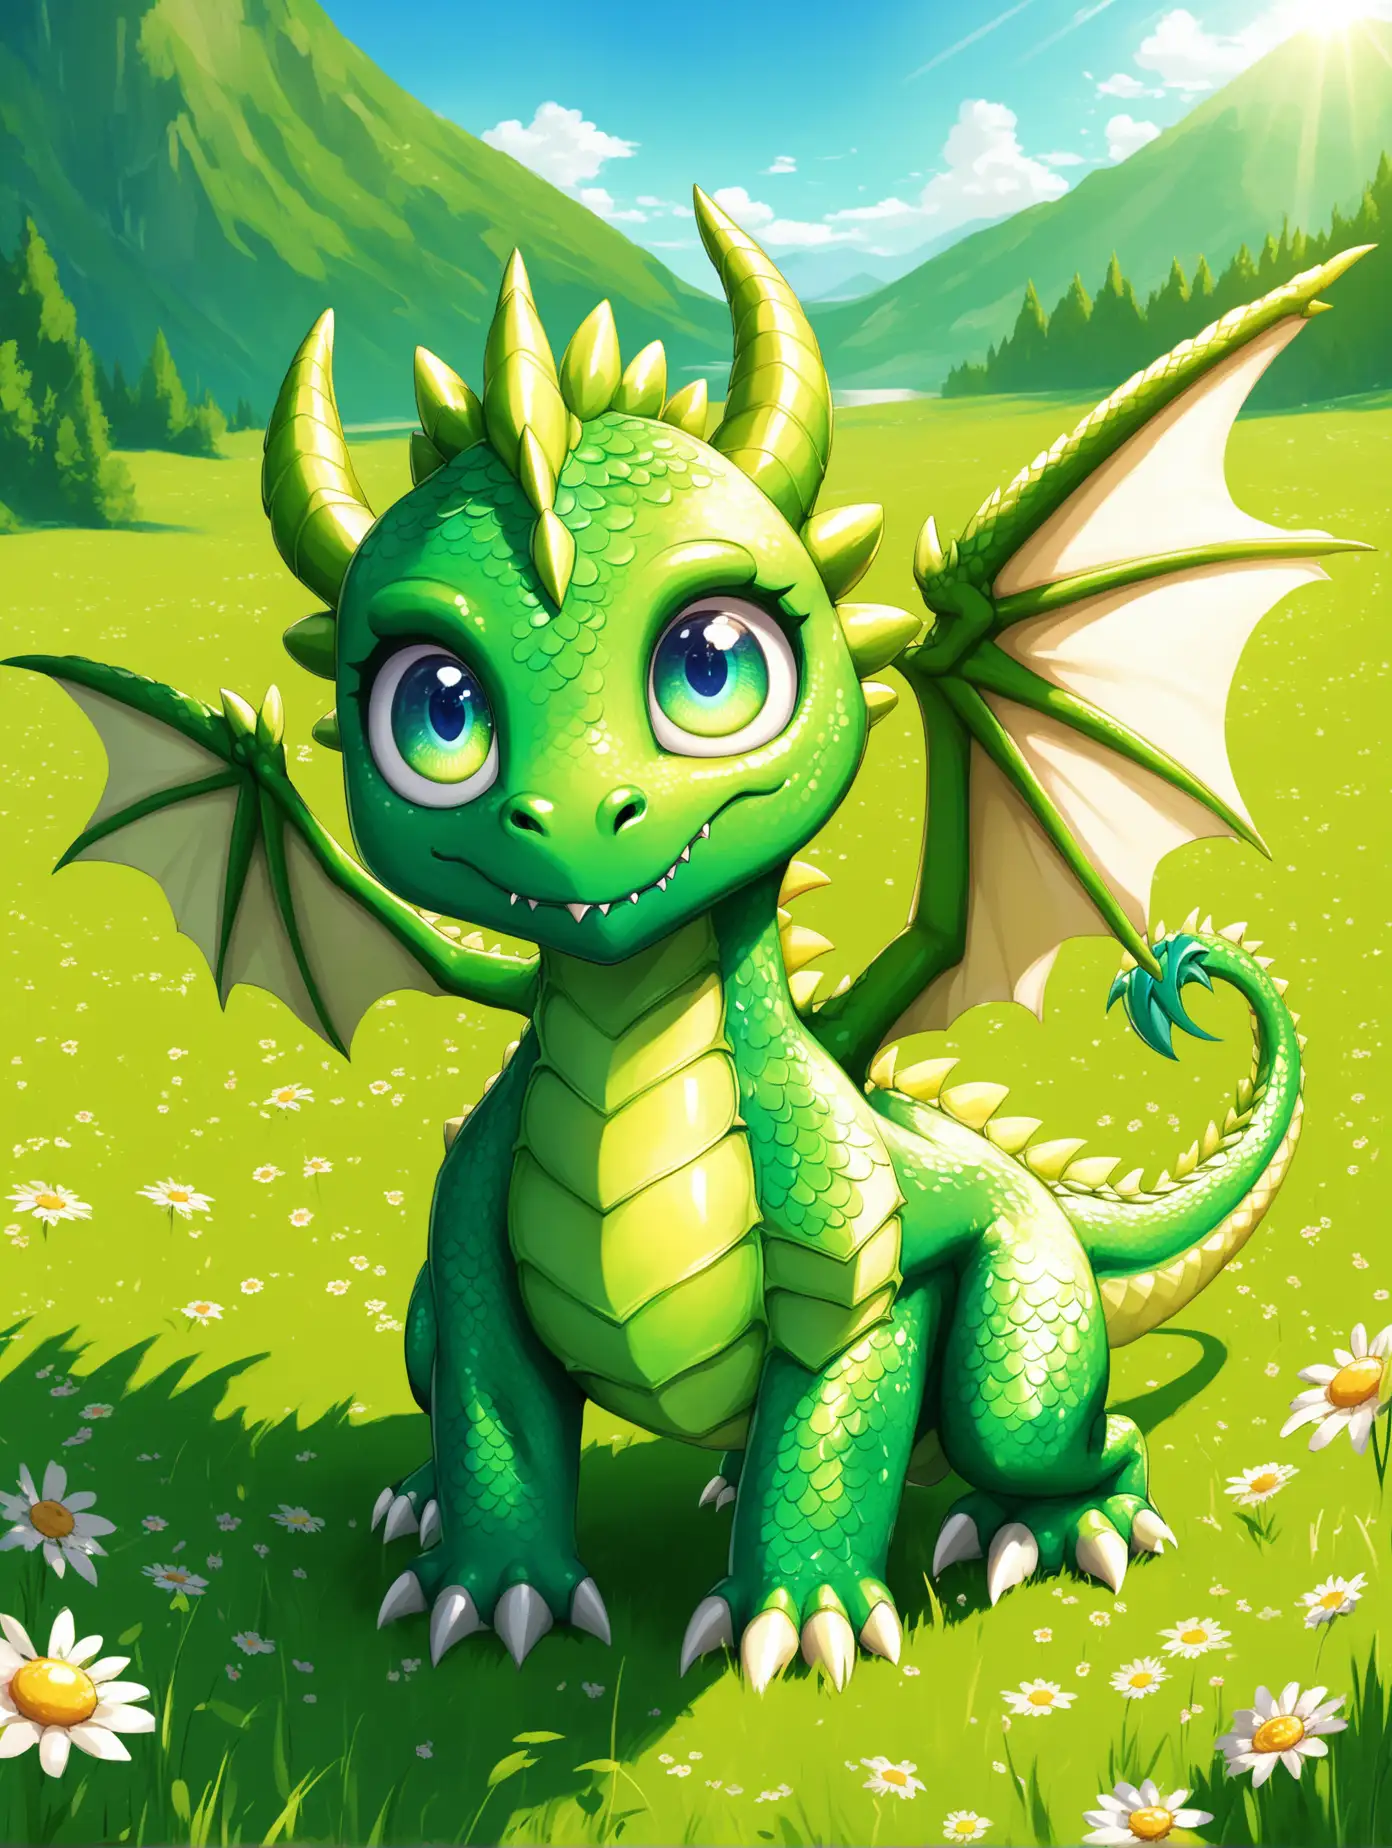  A bright green dragon with big eyes and small wings standing in a sunny meadow.